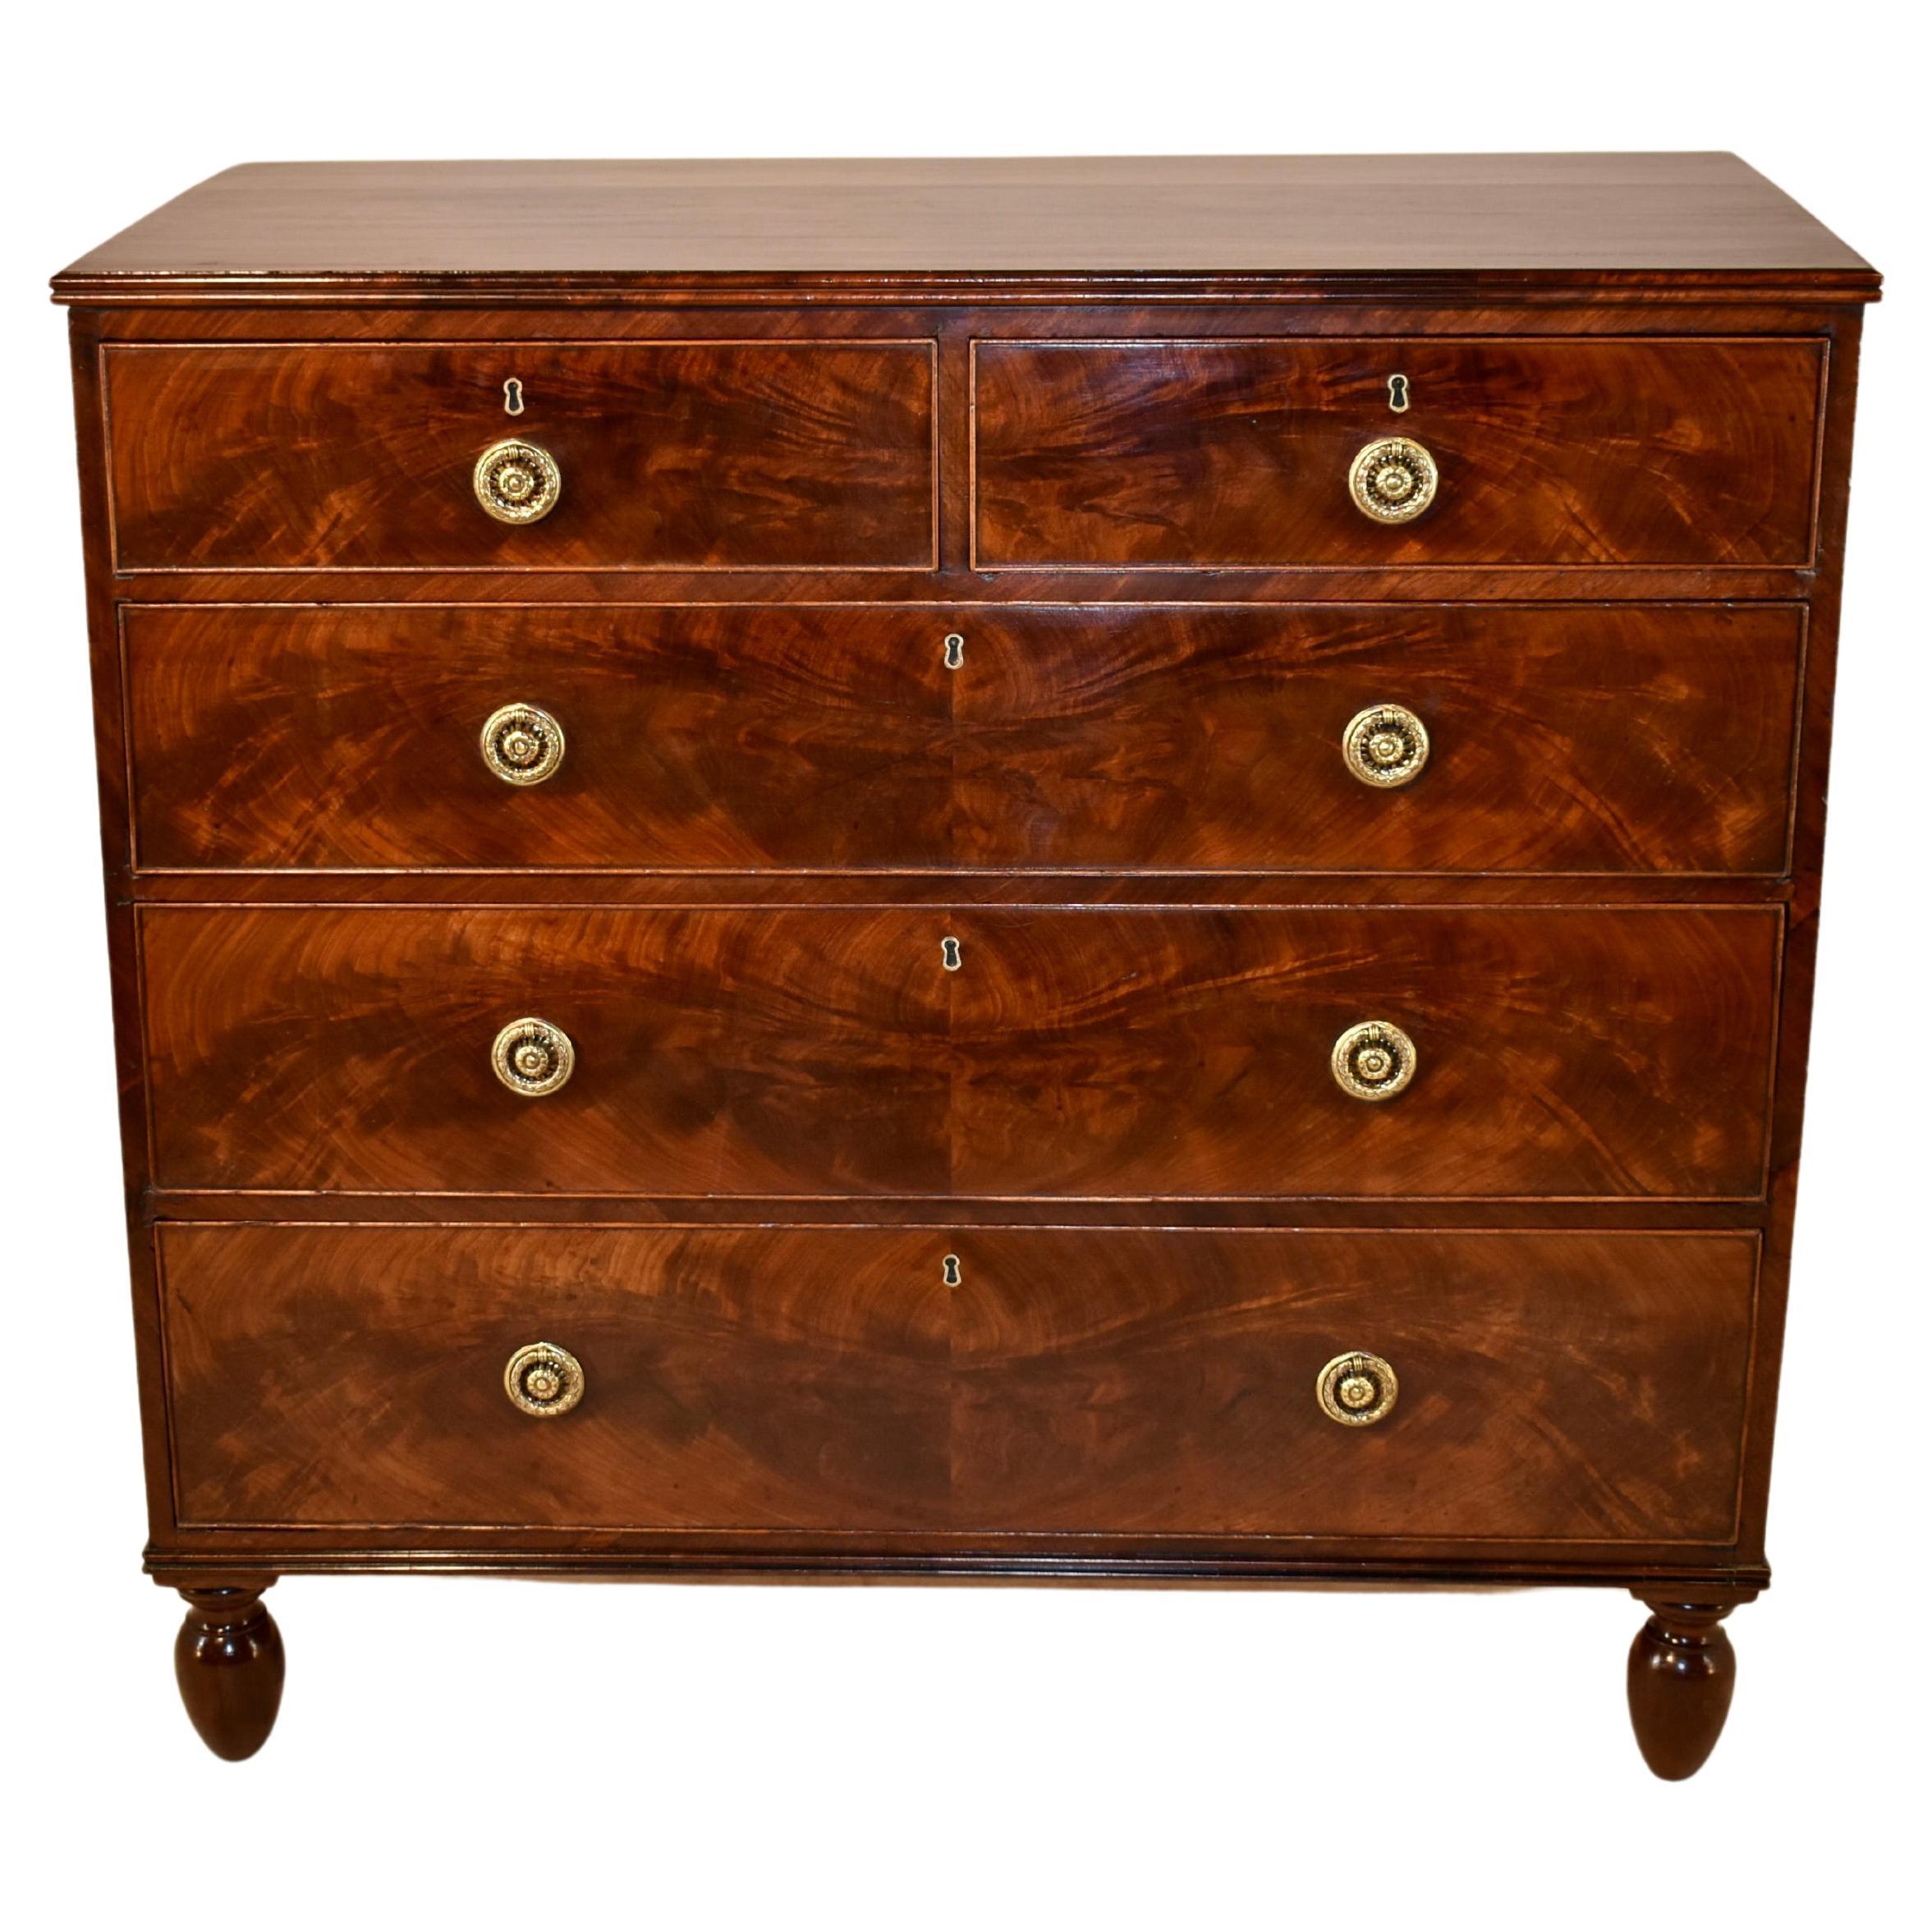 Early 19th Century English Mahogany Chest of Drawers